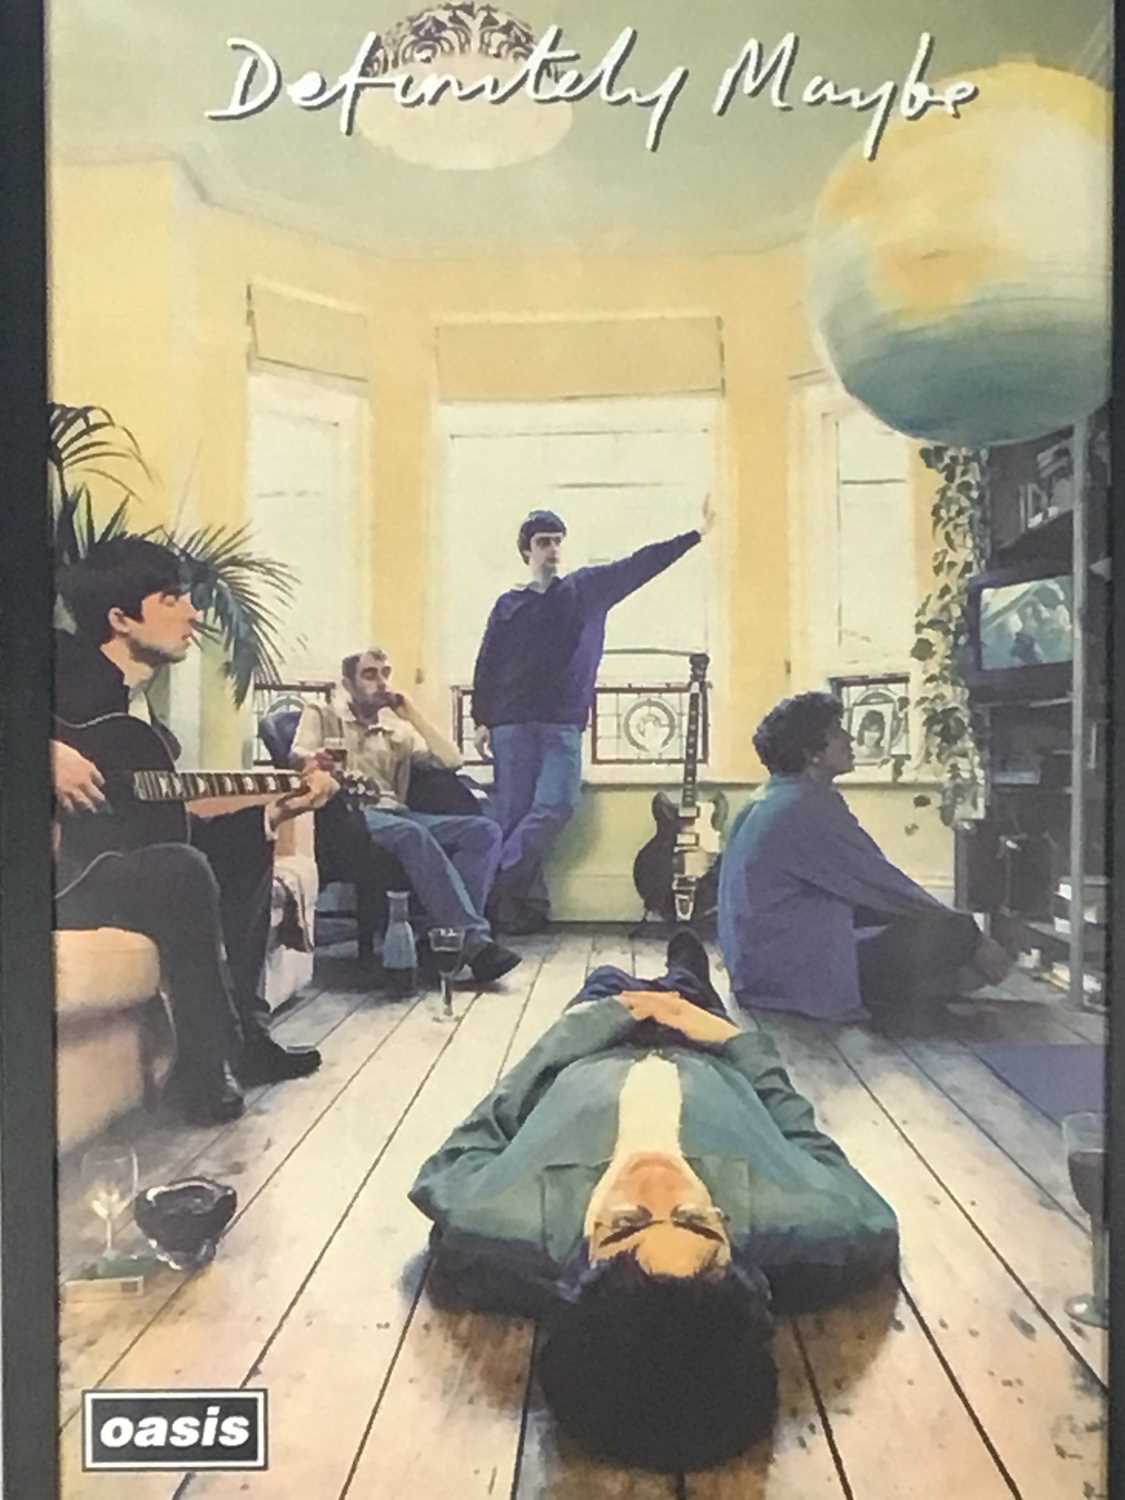 OASIS 'DEFINITELY MAYBE' ALBUM POSTER, ALONG WITH 'THE BEATLES THROUGH THE YEARS' POSTER